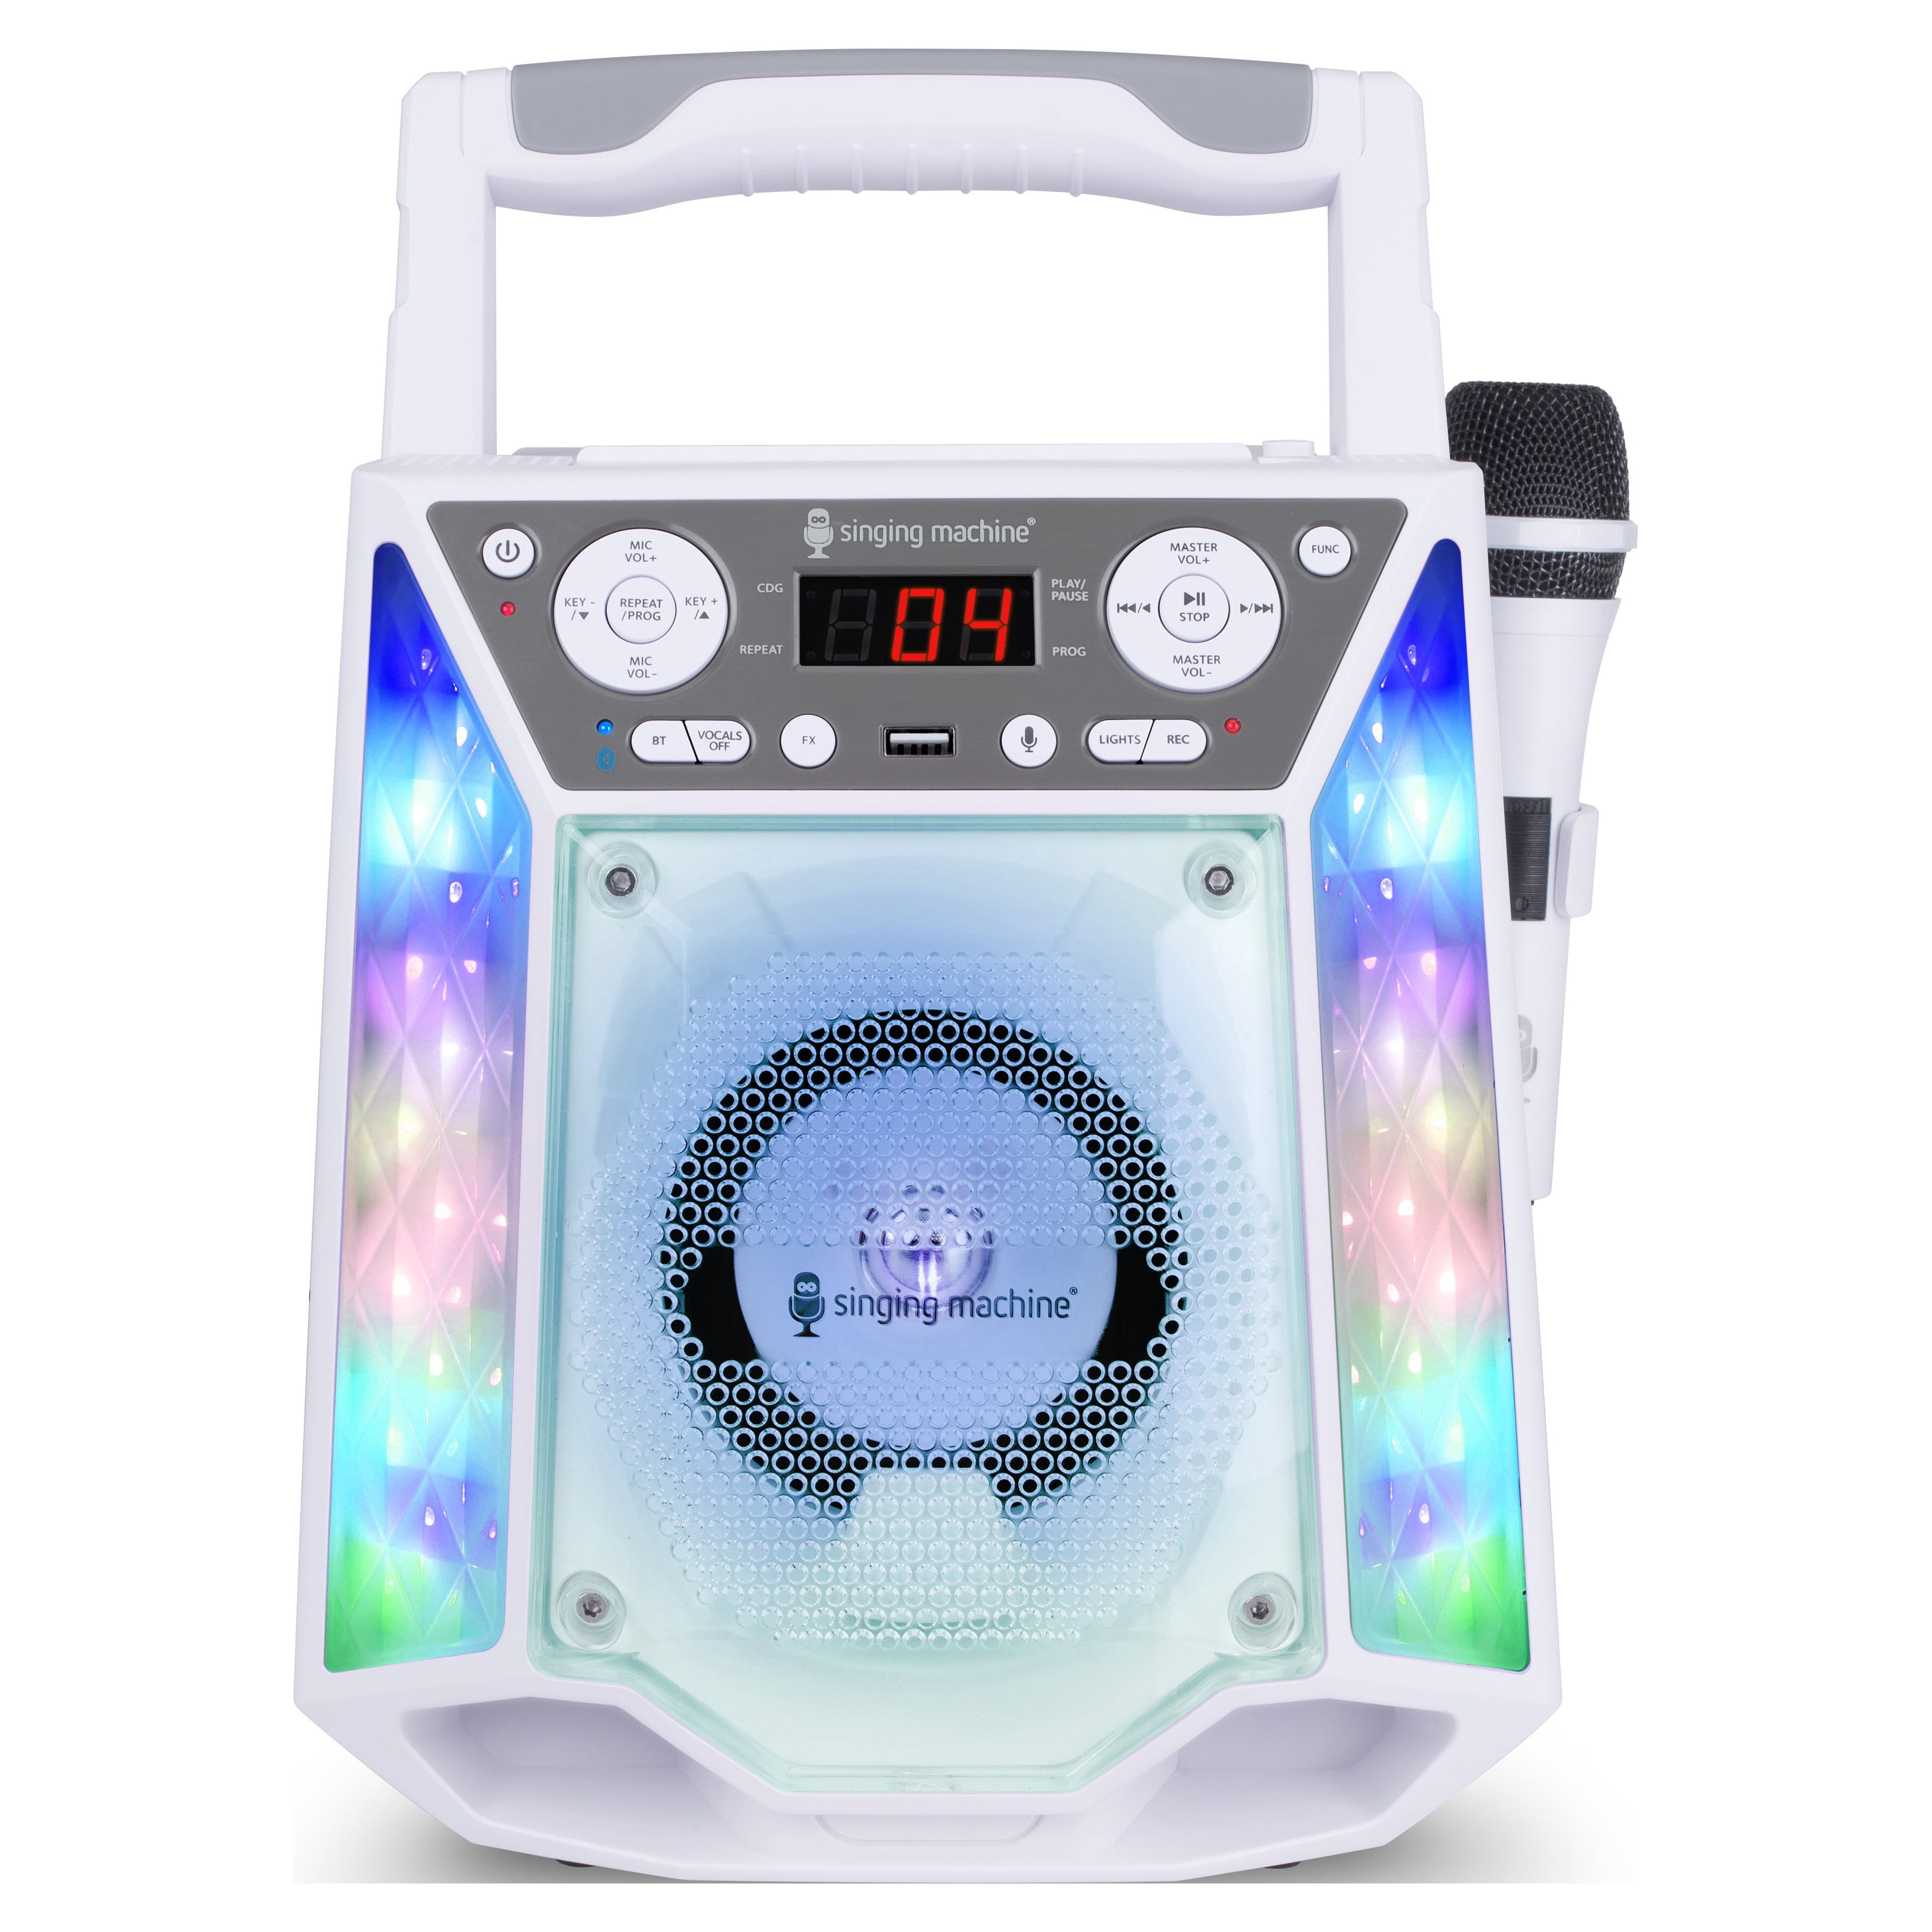 The Singing Machine Shine Voice SML2350 Karaoke Machine with Voice Assistant - image 1 of 7